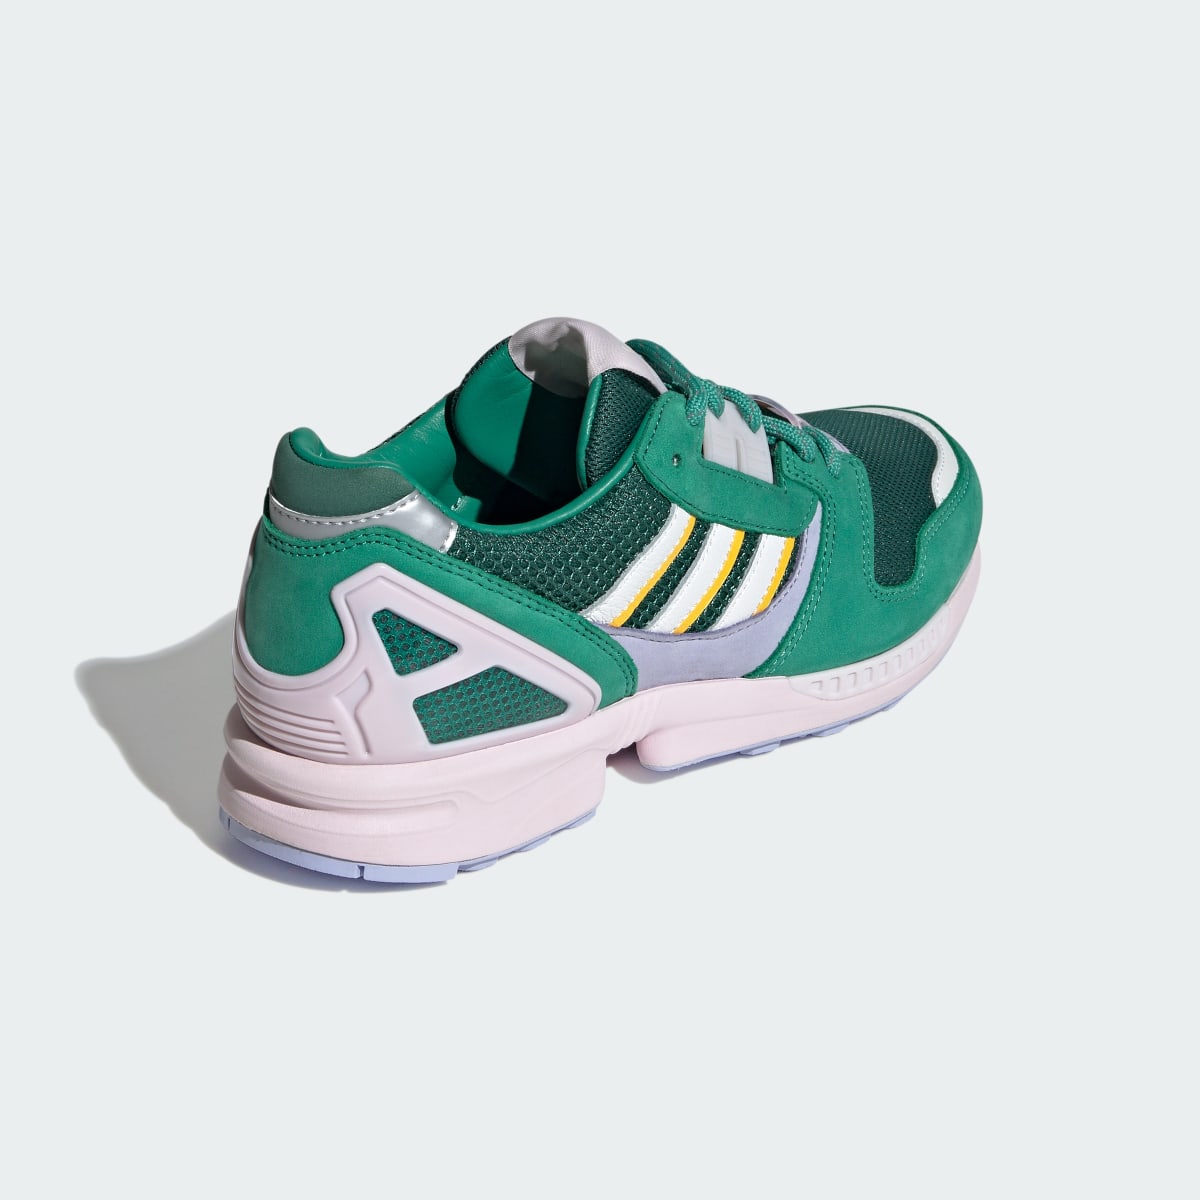 Adidas ZX 8000 Shoes. 6